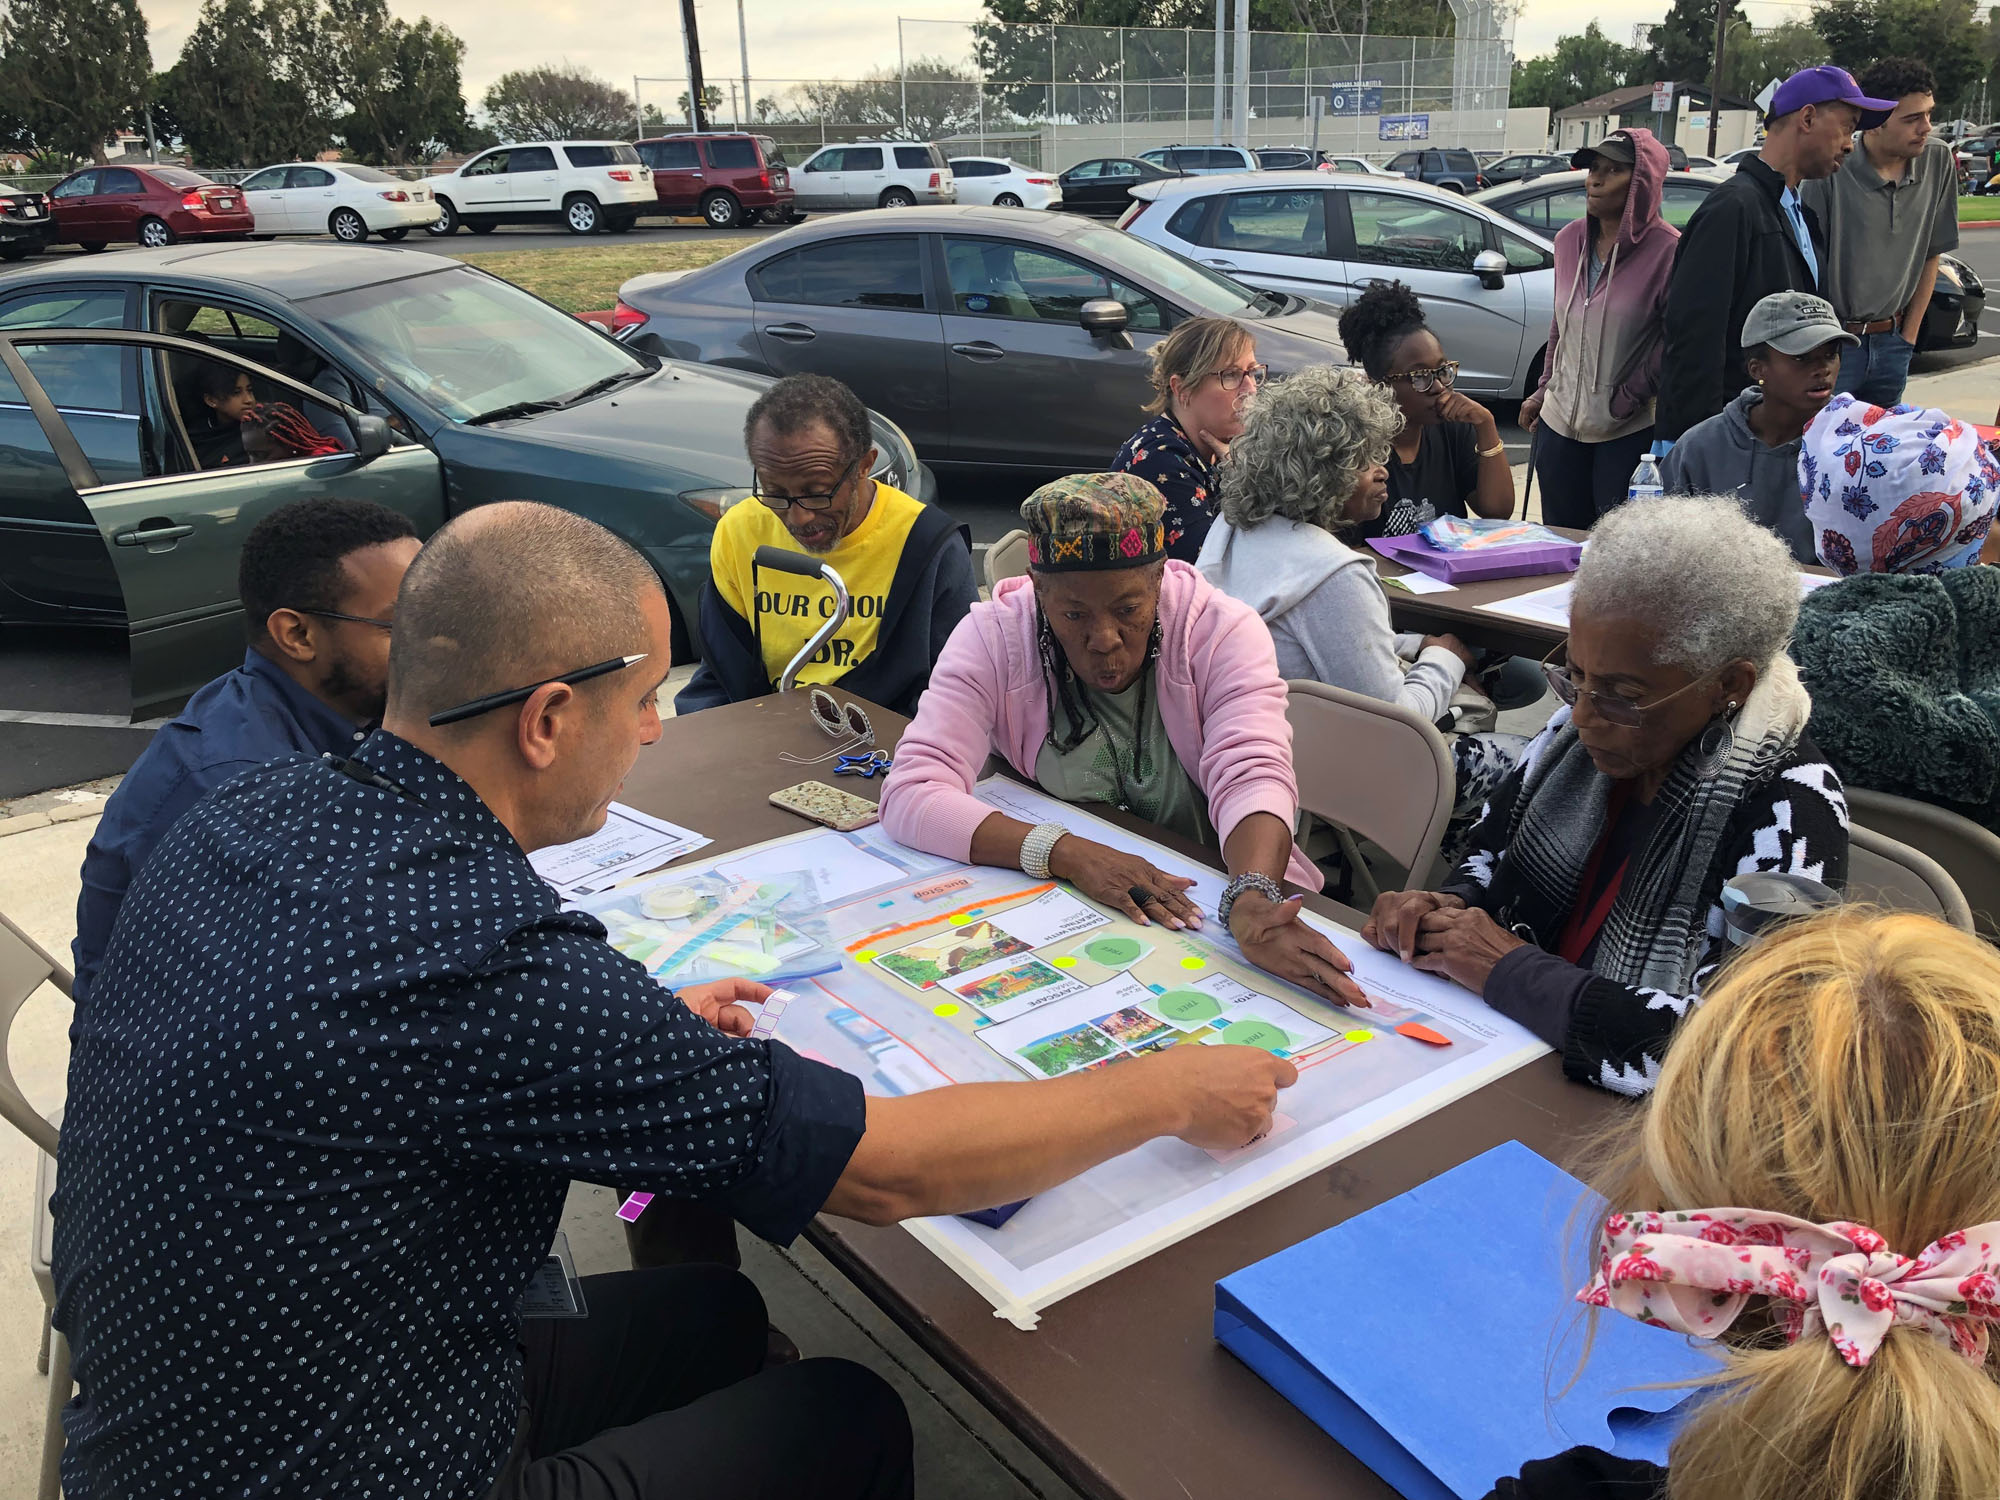 People seated at table in a parking lot reviewing a design plan for a new park